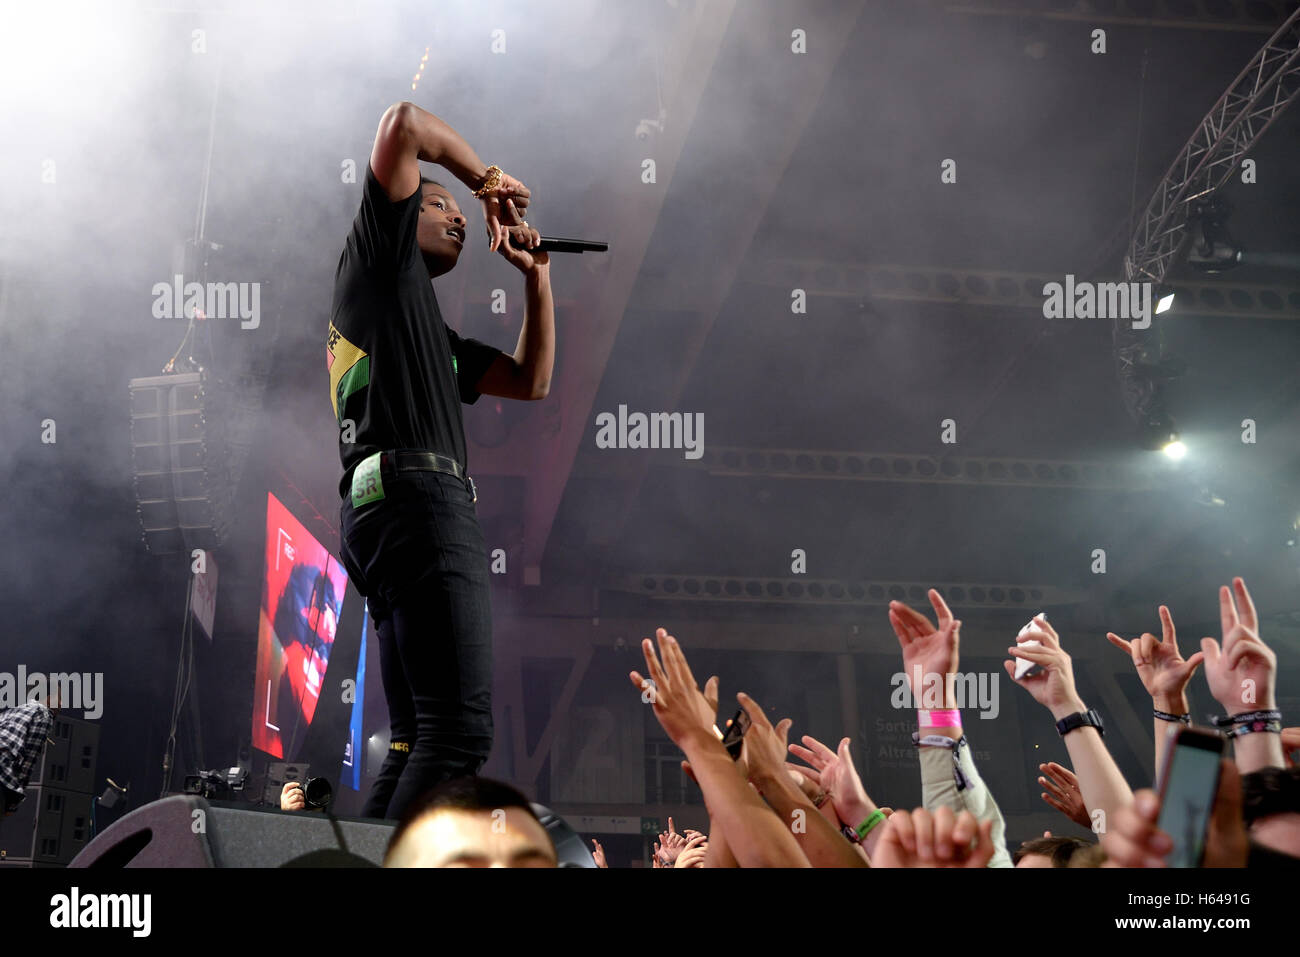 BARCELONA - JUN 19: ASAP Rocky (rapper from Harlem and member of the hip hop collective ASAP Mob) in concert at Sonar Festival. Stock Photo